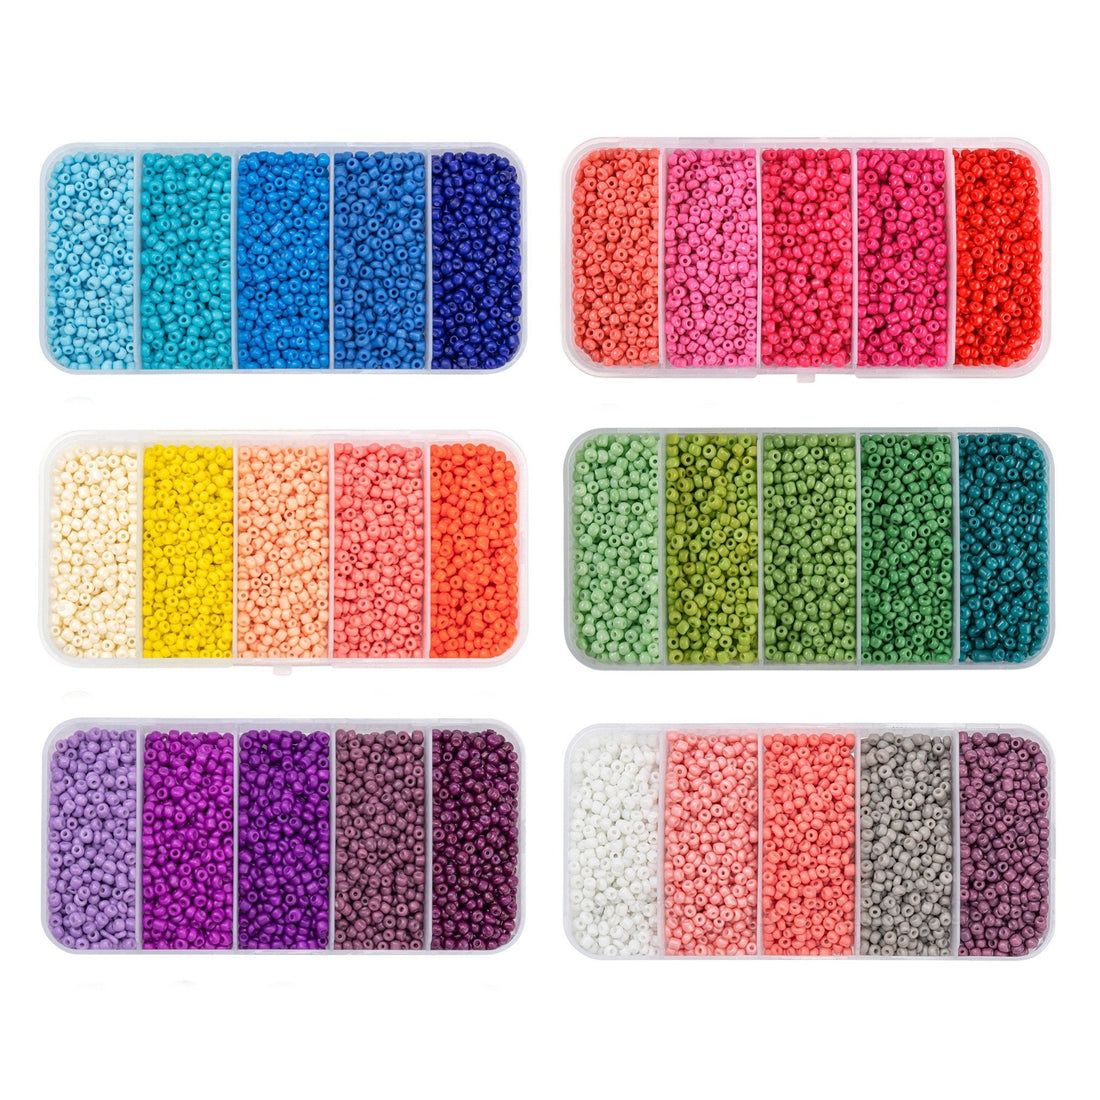 1900 assorted seed beads, 3mm glass mixed beads kit, Jewelry making set